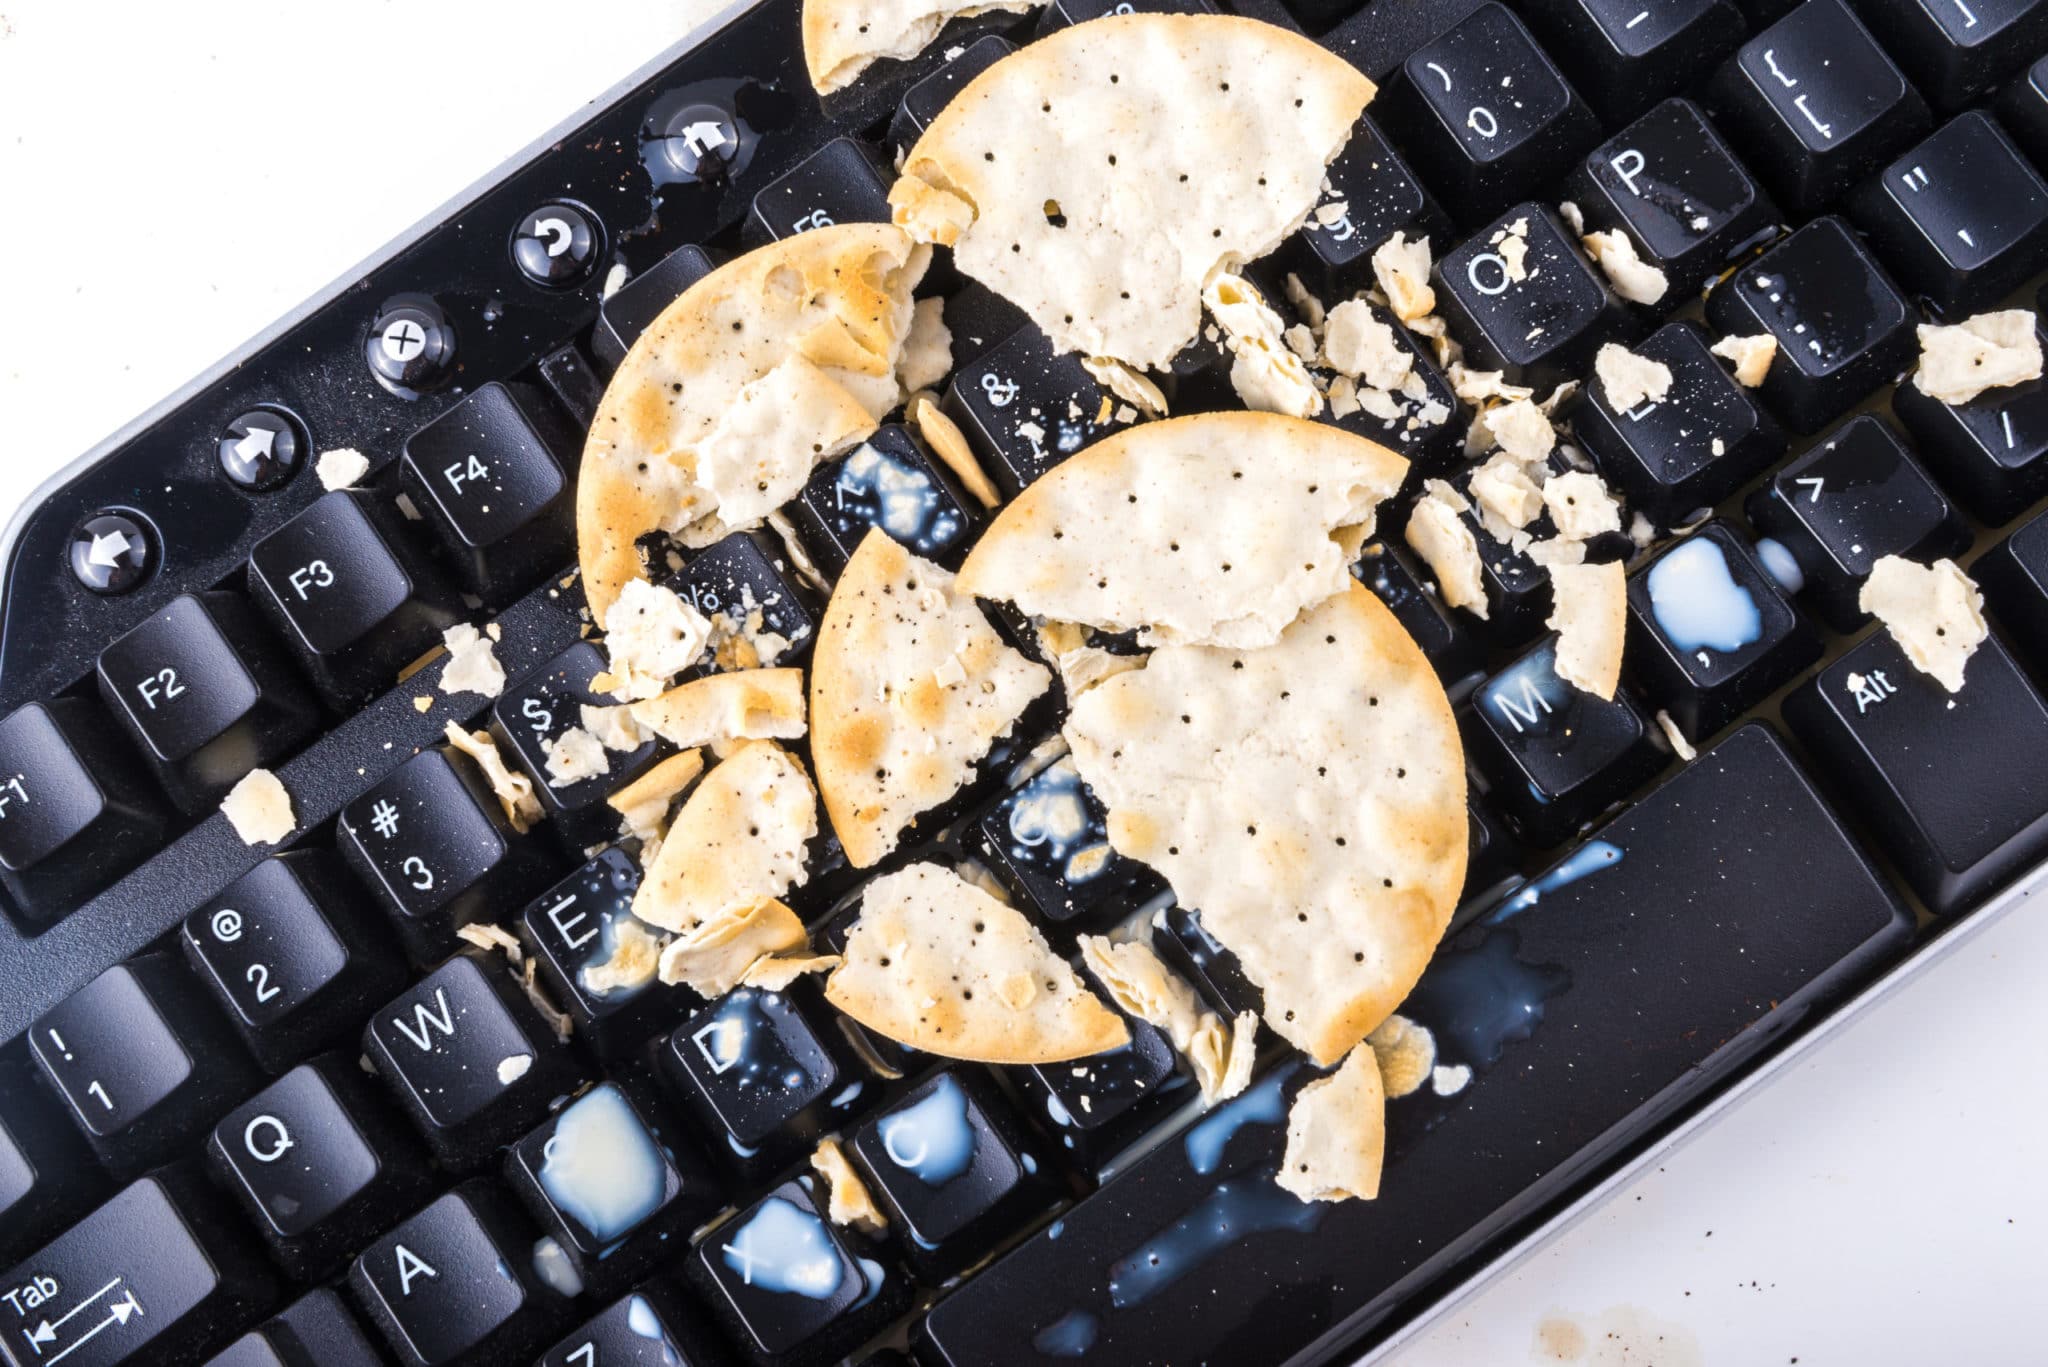 How to Deep Clean & Disinfect Your Keyboard <a href='http://blog.squaretrade.com/how-to-deep-clean-disinfect-your-keyboard/'>Read more</a>